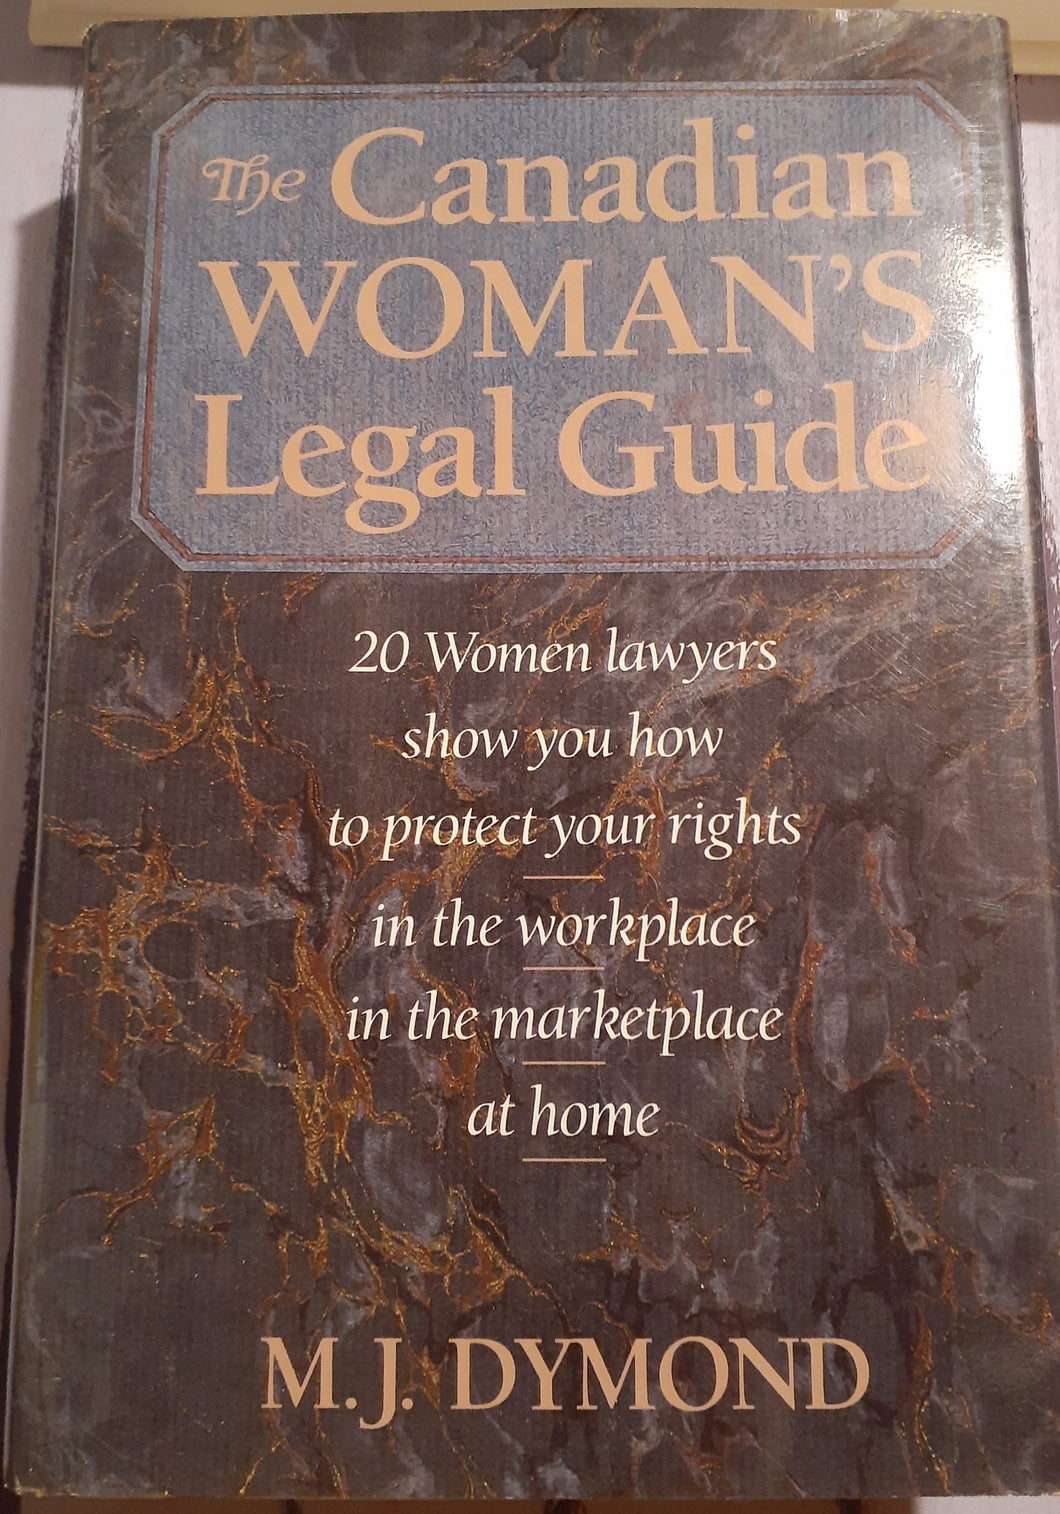 The Canadian Woman's Legal Guide